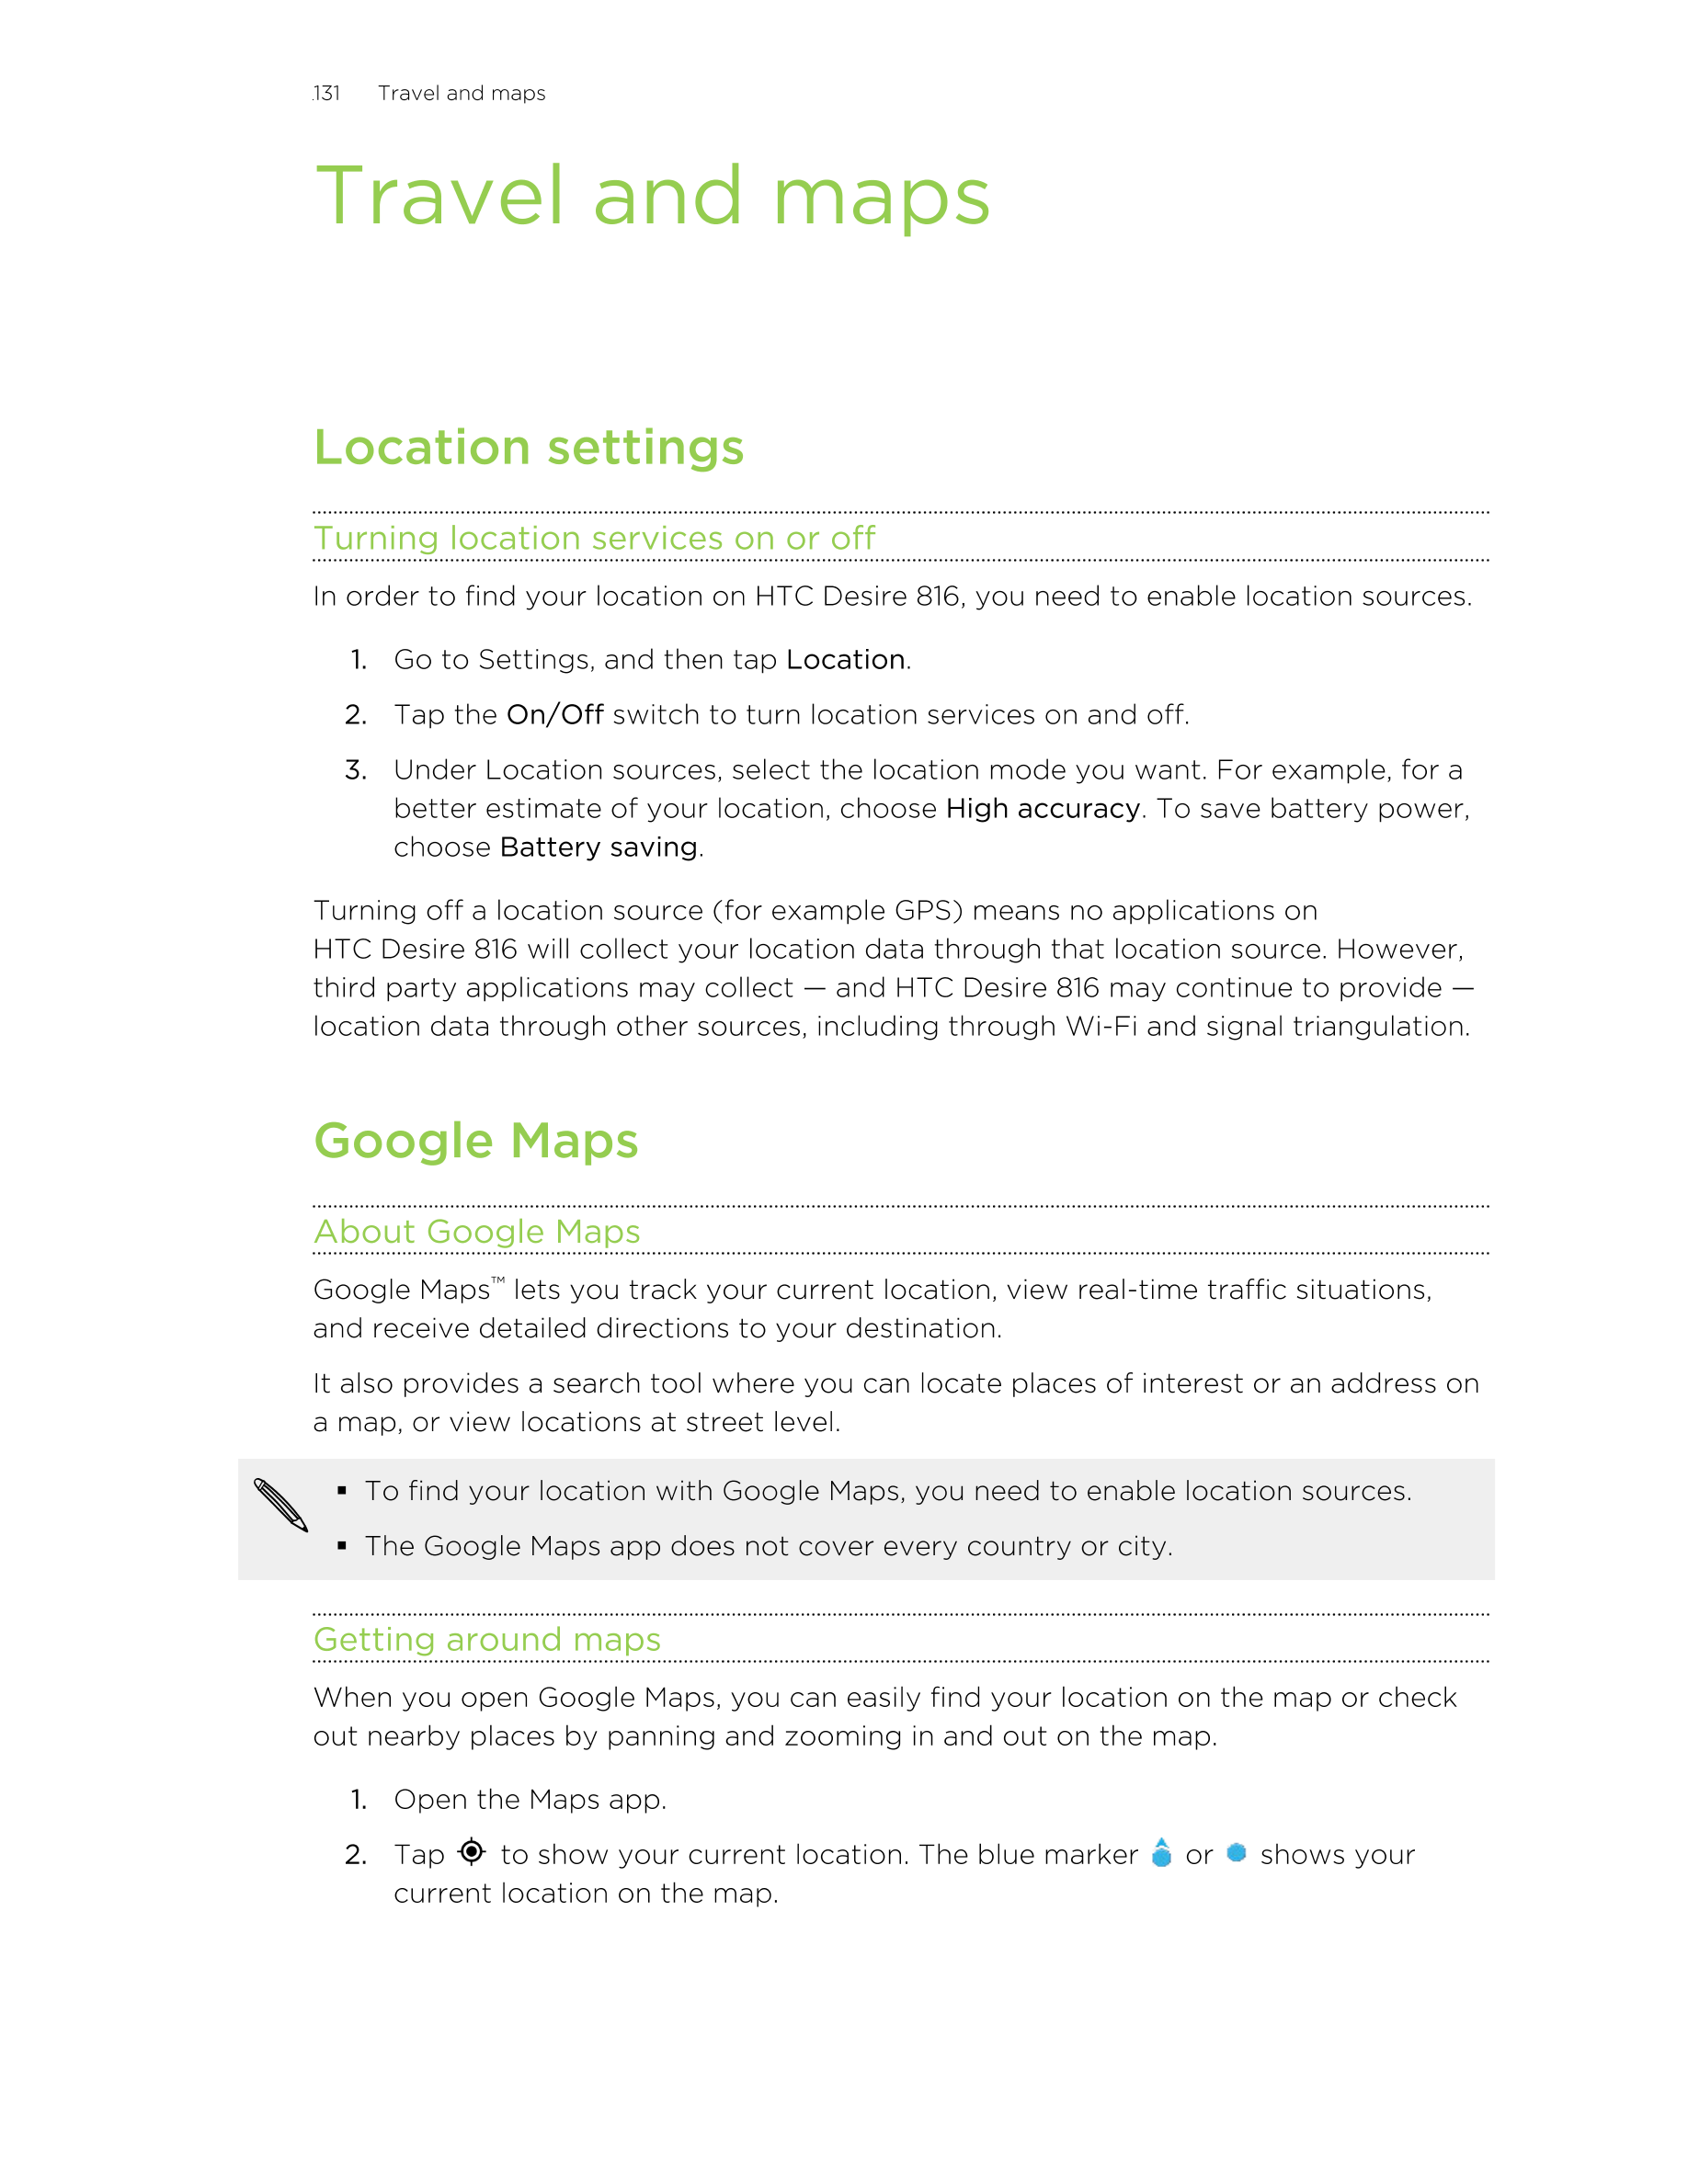 131      Travel and maps
Travel and maps
Location settings
Turning location services on or off
In order to find your location on